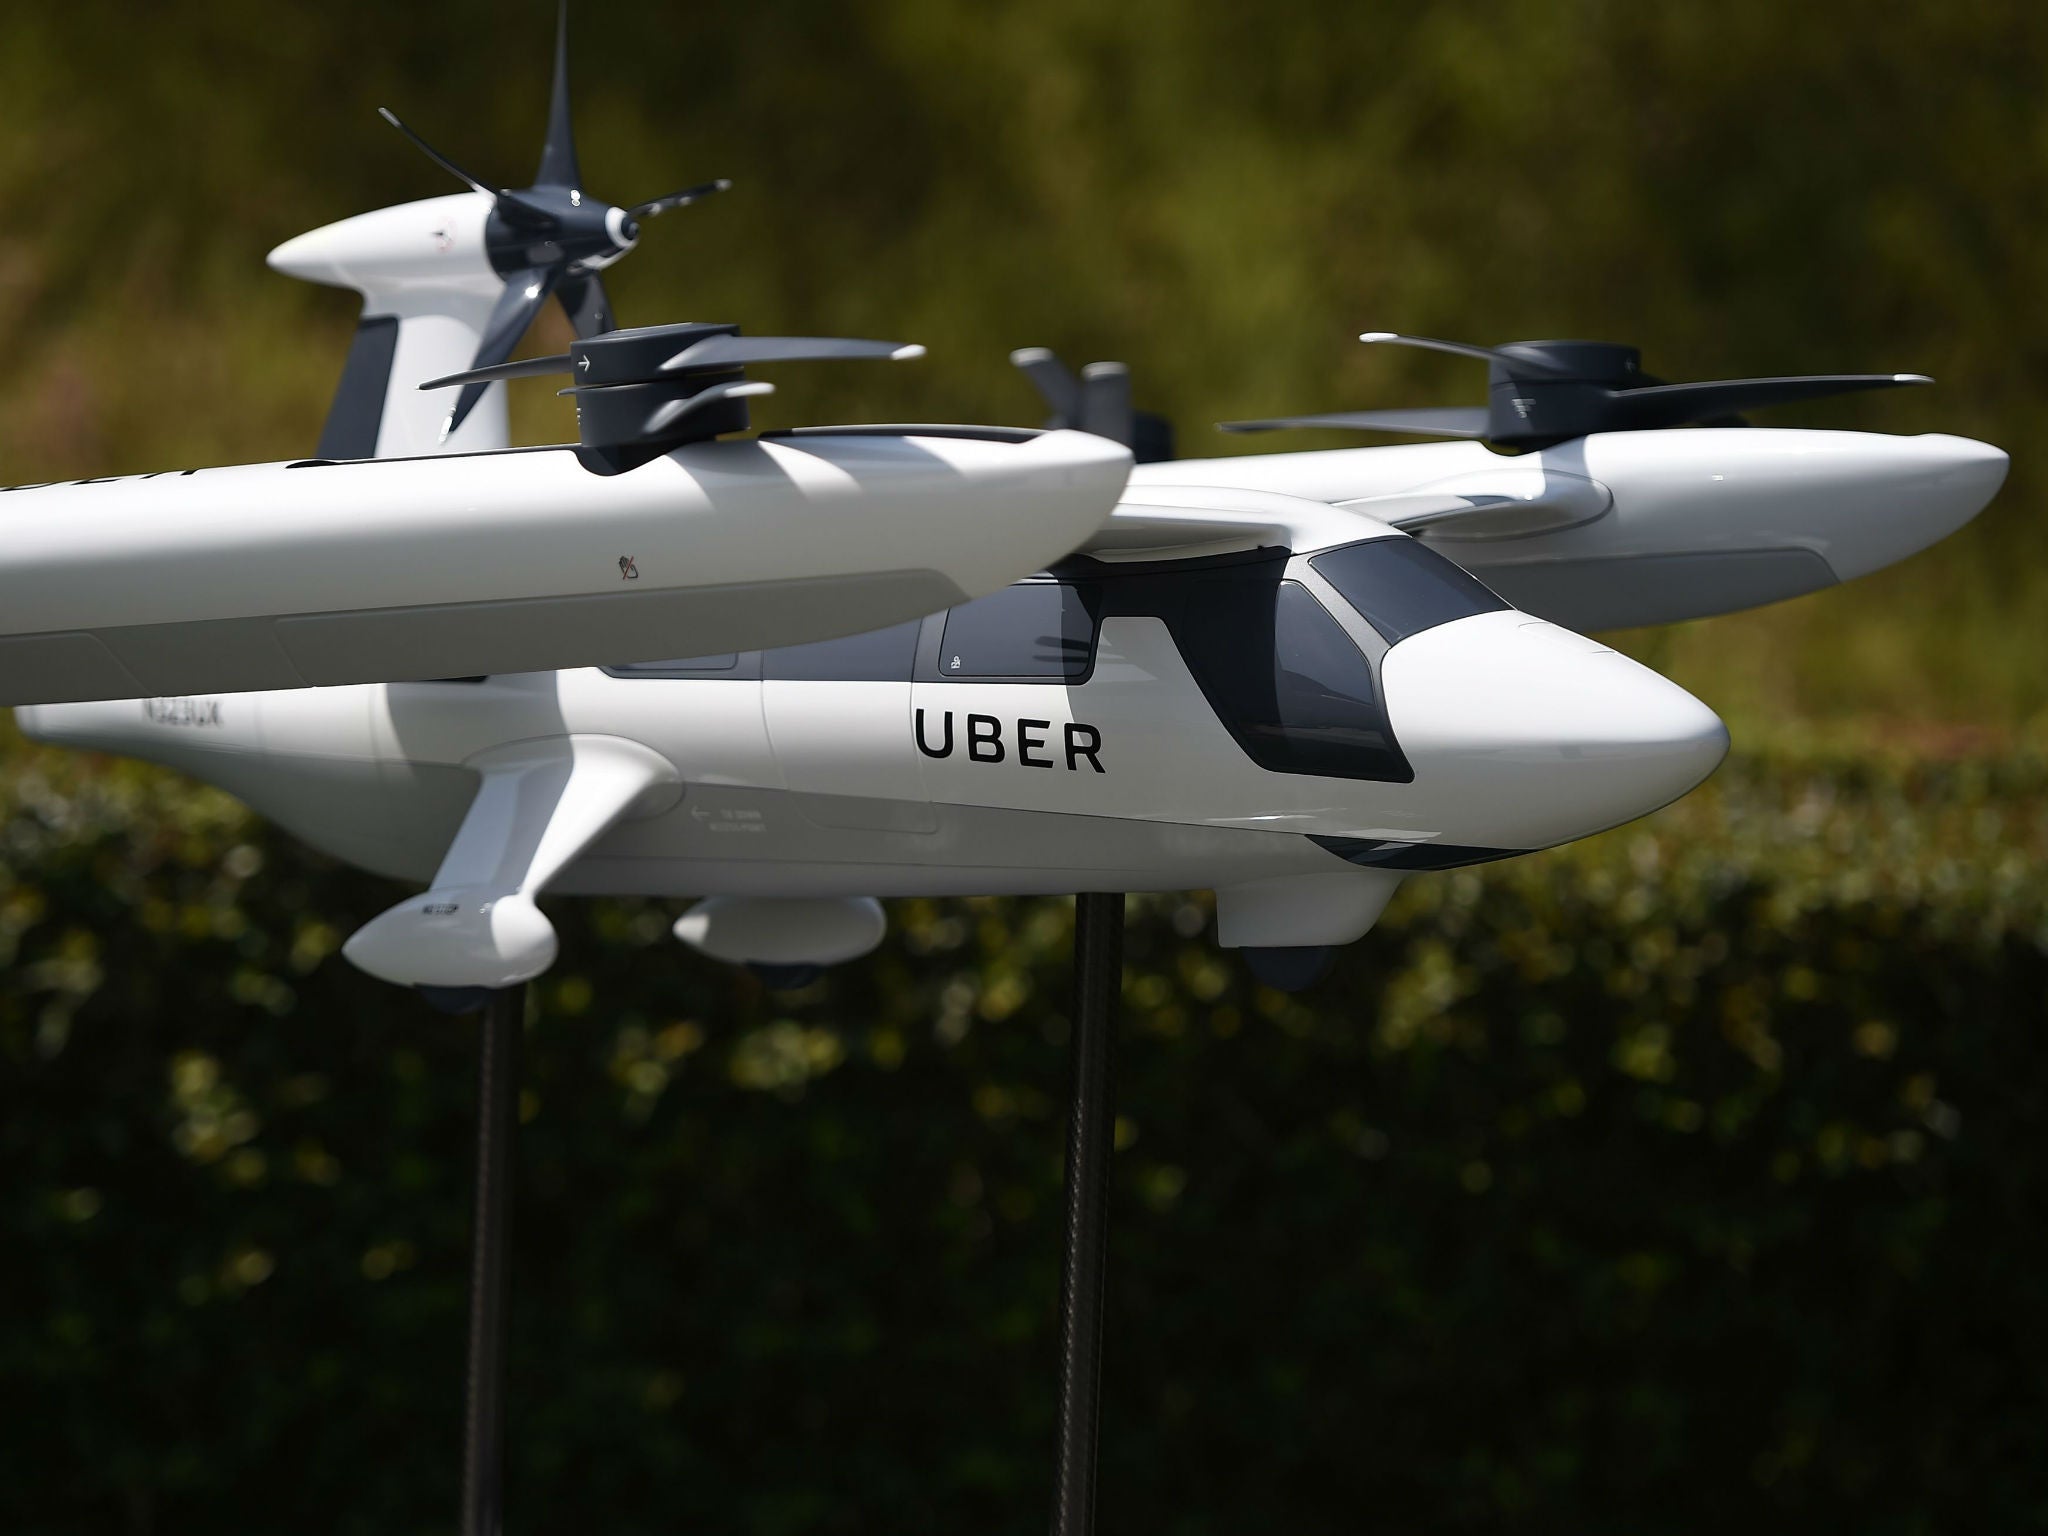 A model of Uber's electric vertical take-off and landing vehicle concept flying taxi is displayed at the second annual Uber Elevate Summit in Los Angeles, California